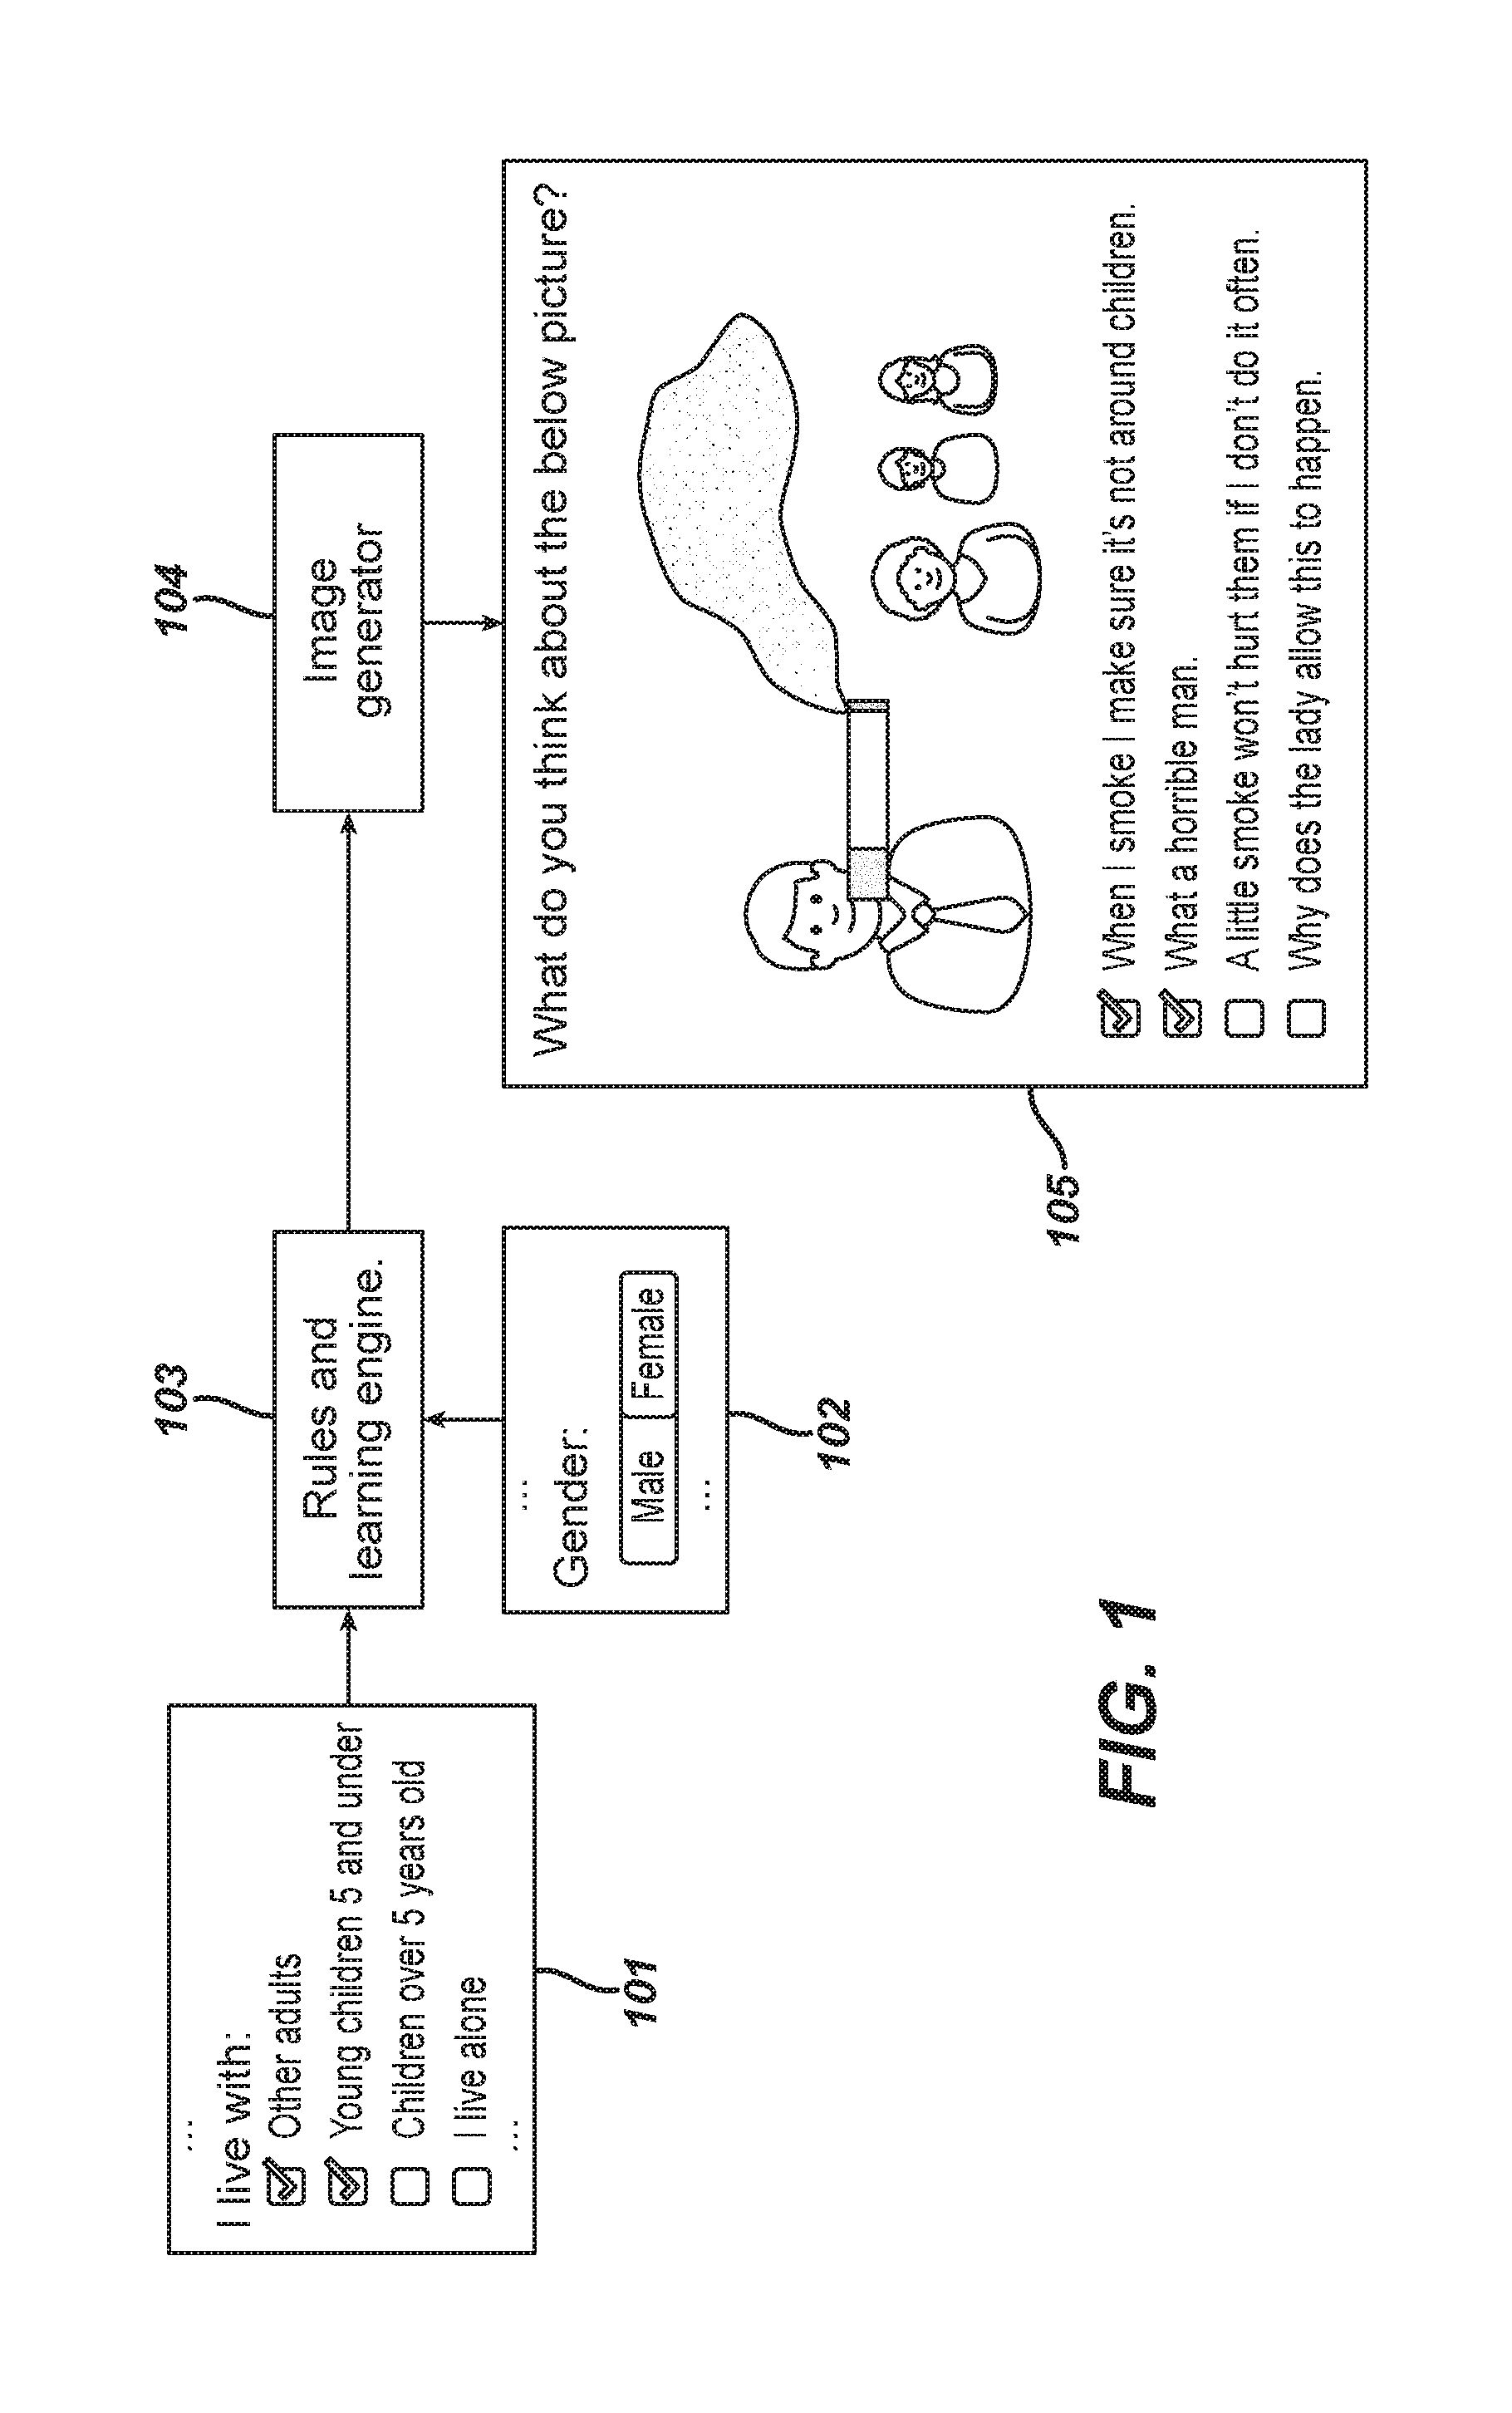 Method and system for enhancing user engagement during wellness program interaction